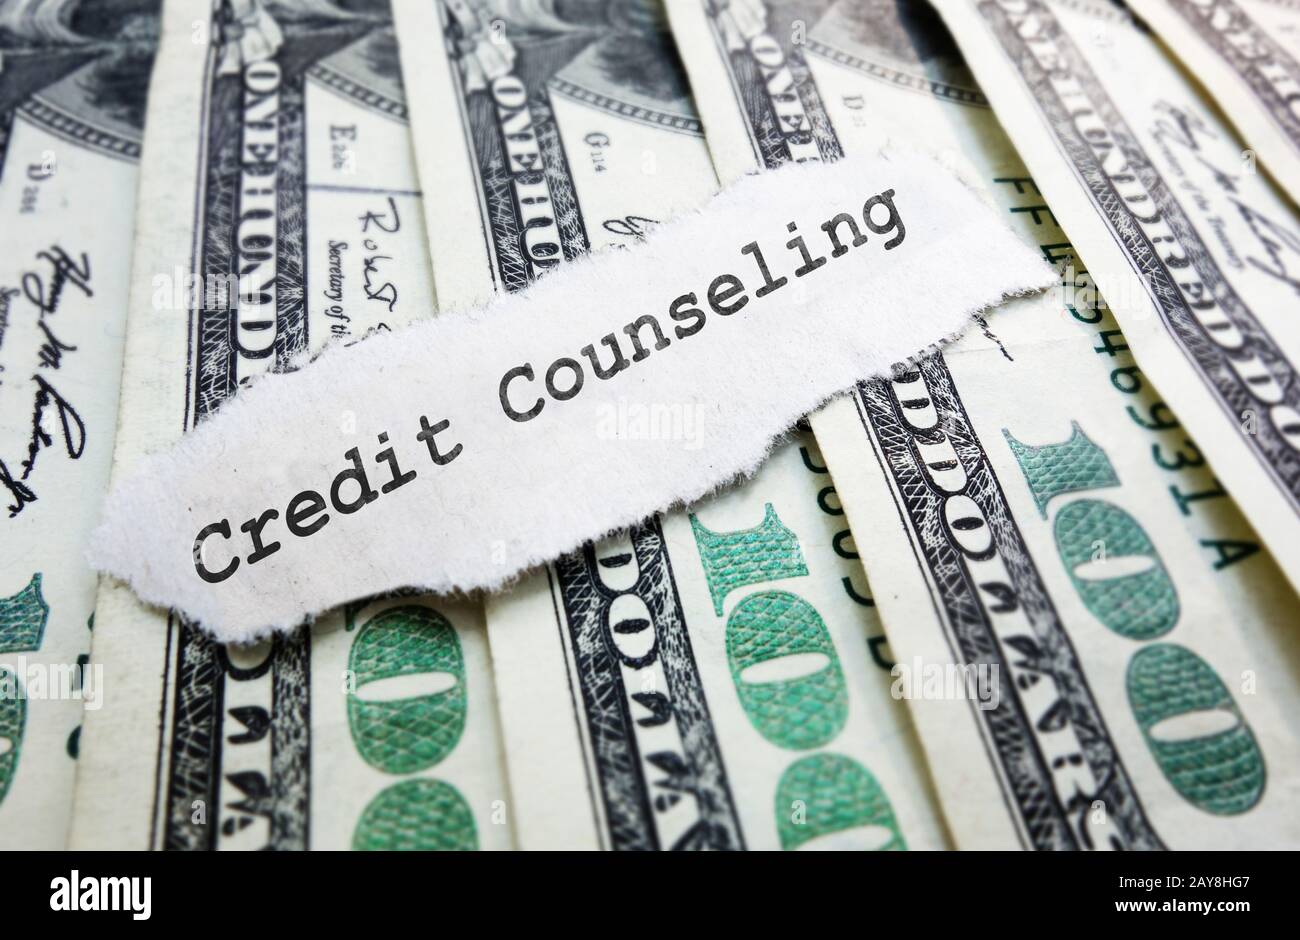 Credit Counseling concept Stock Photo